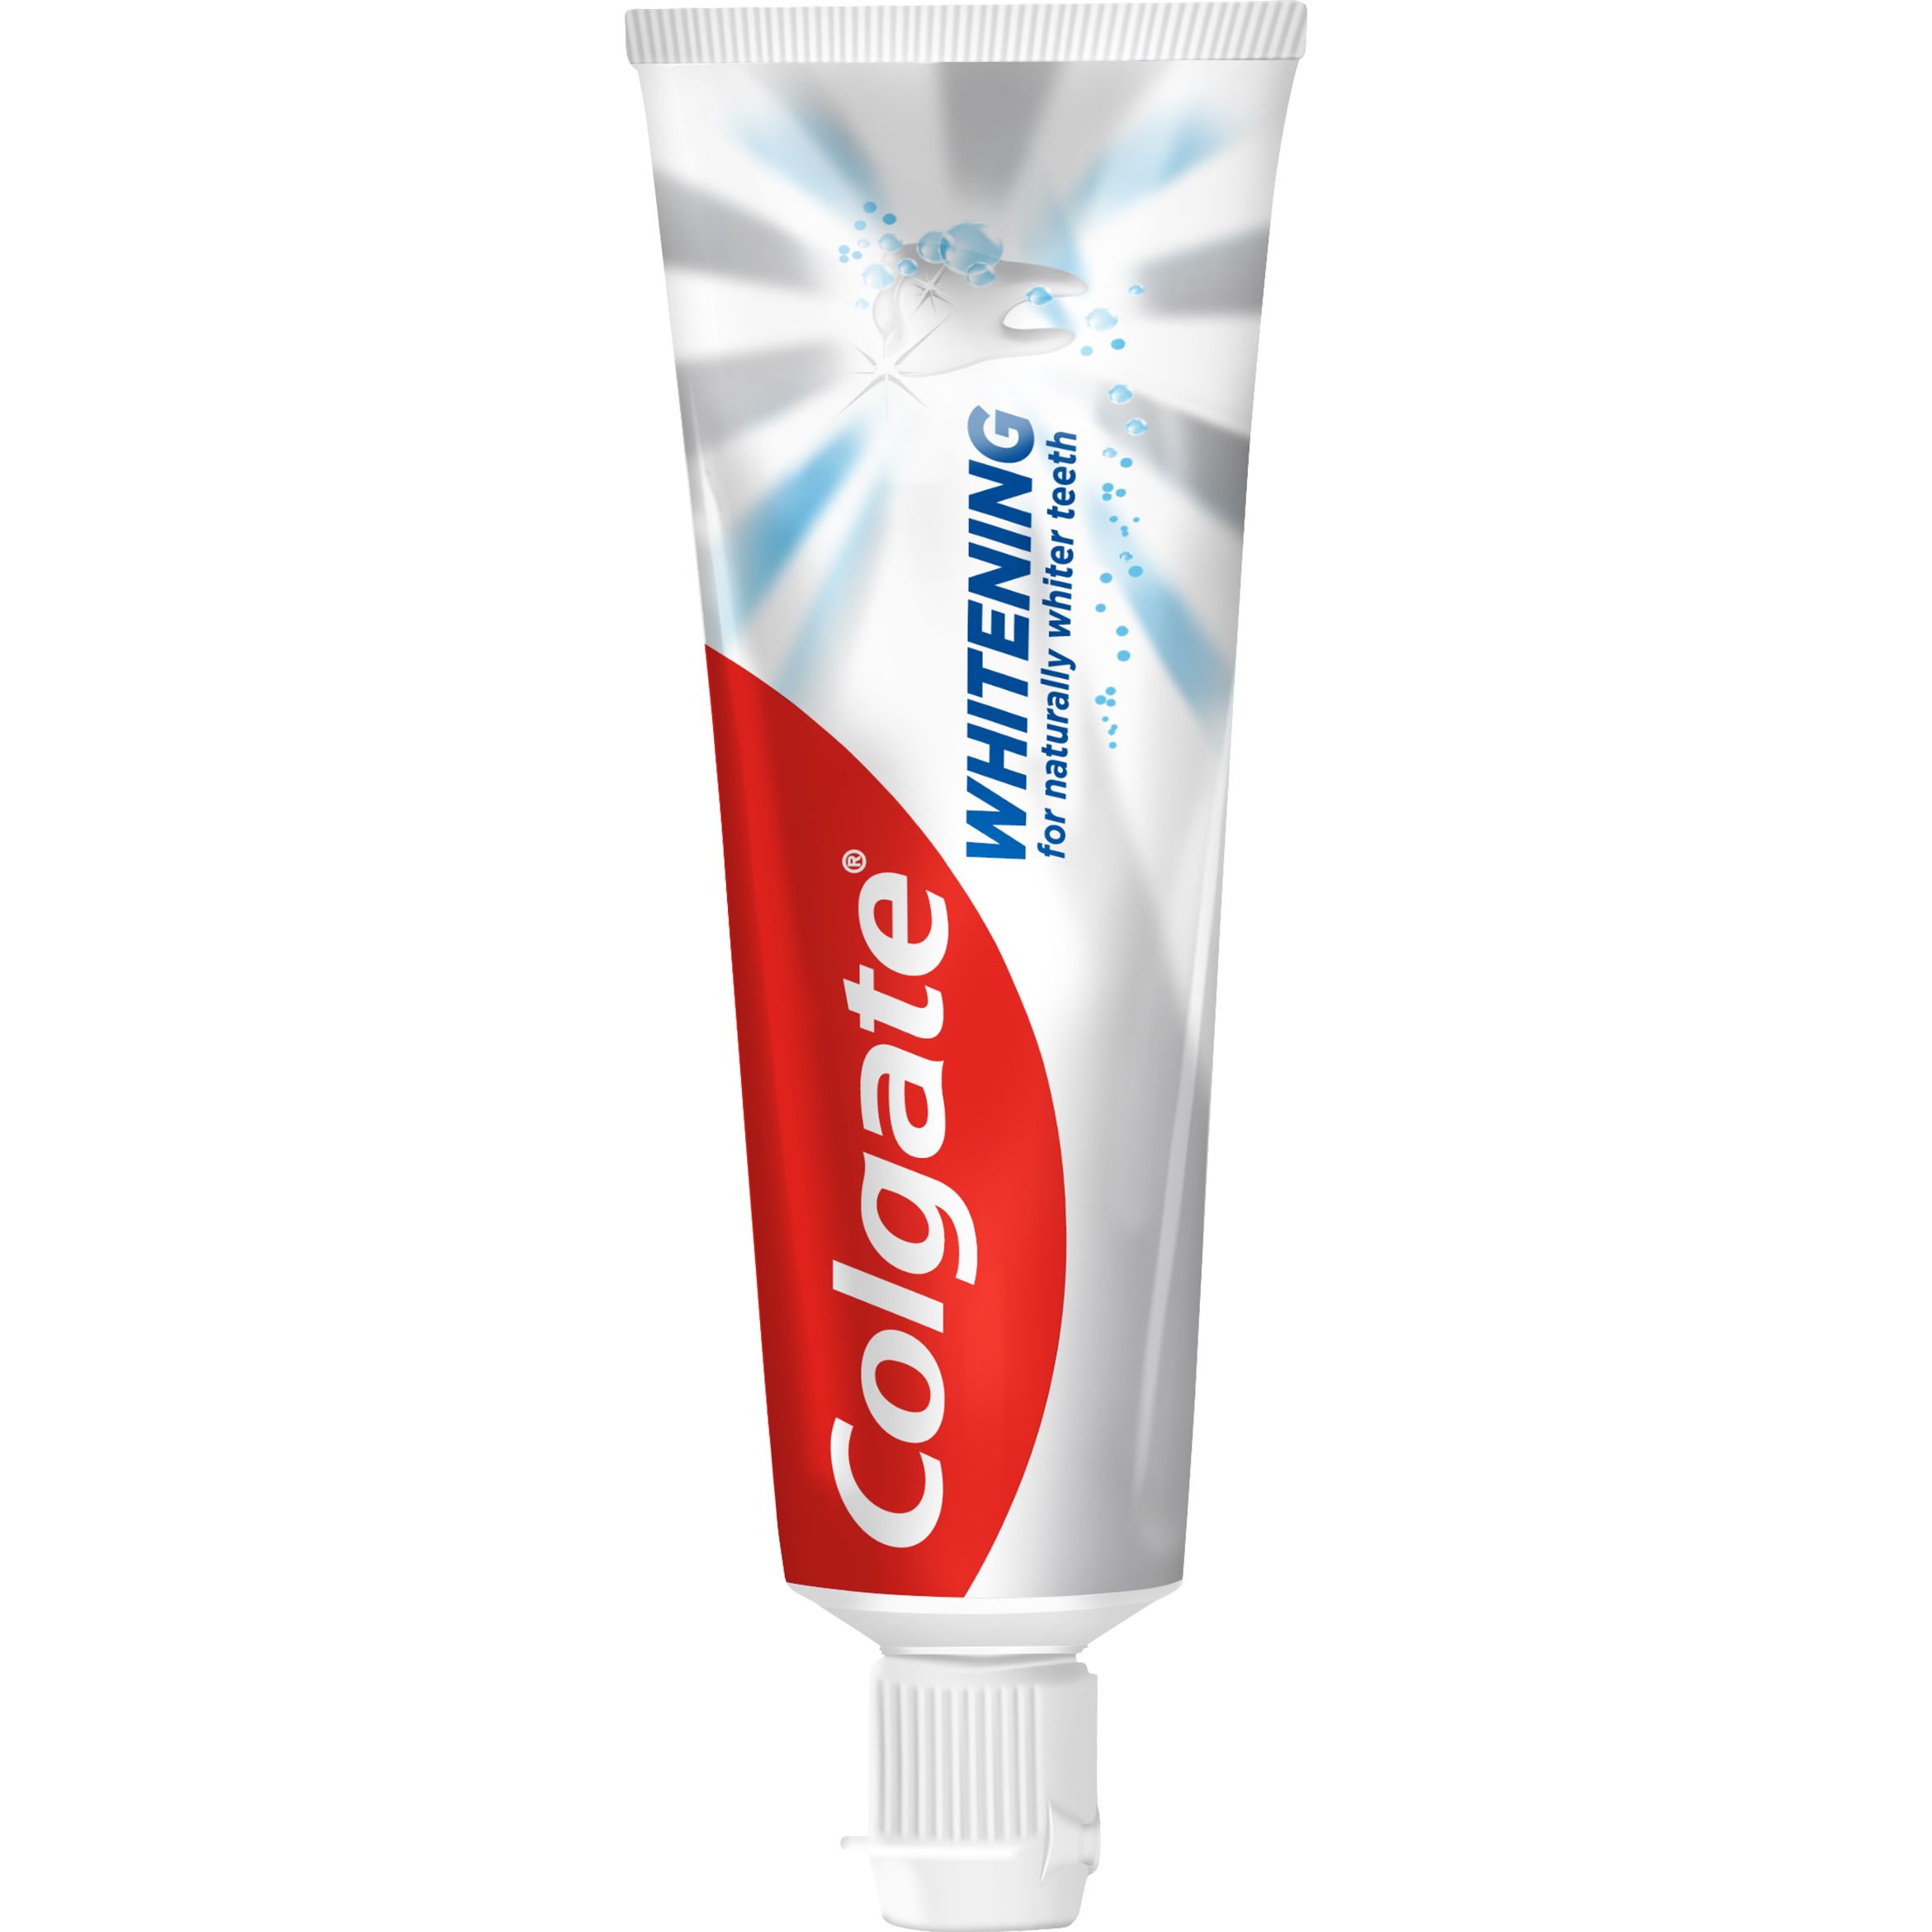 Зубна паста Colgate Whitening for Naturally Whiter Teeth 75 мл - фото 2